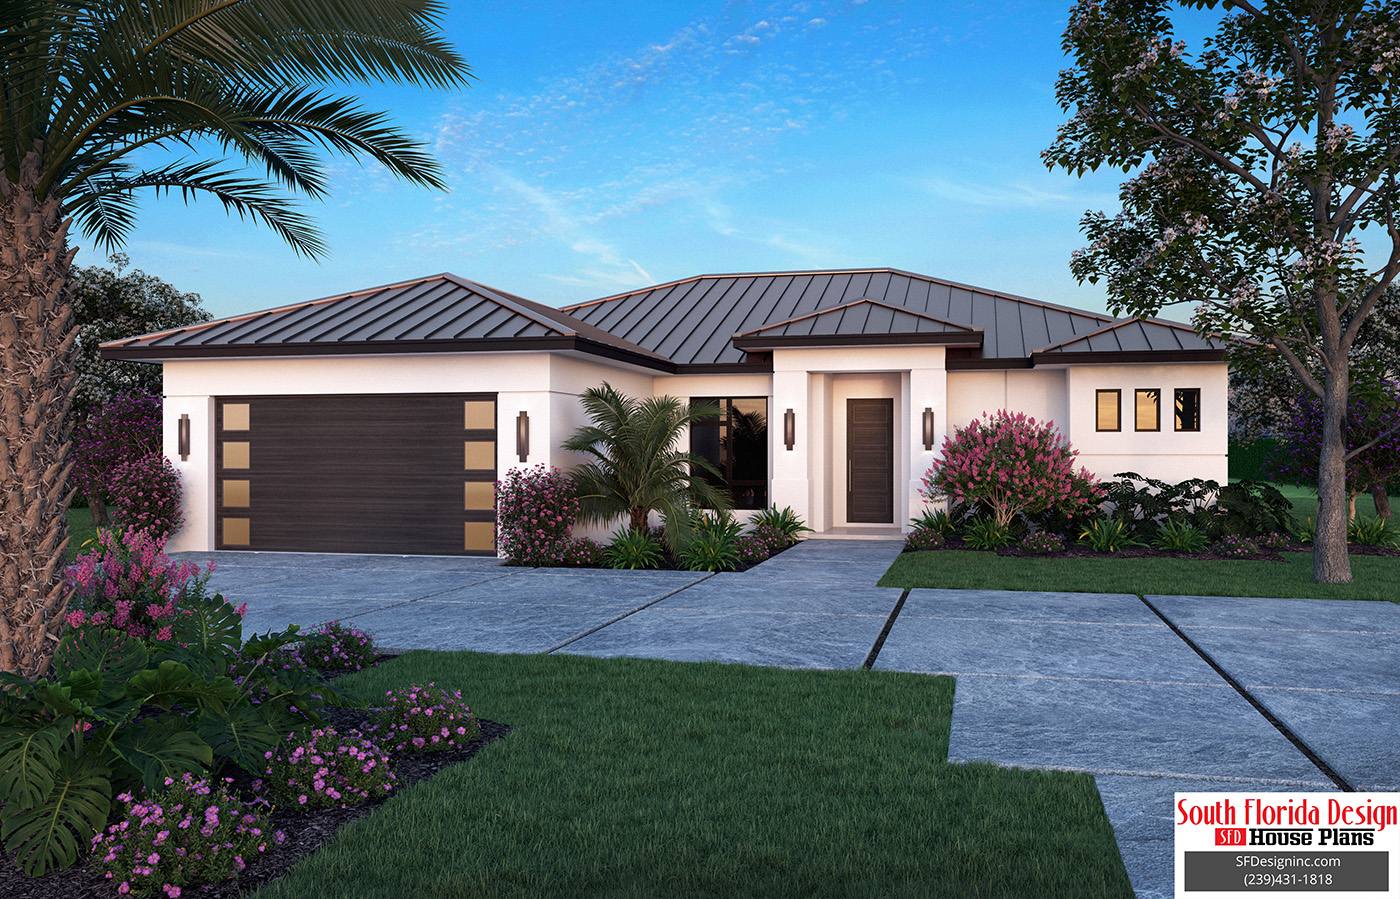 Color front elevation rendering of a 1960sf house plan